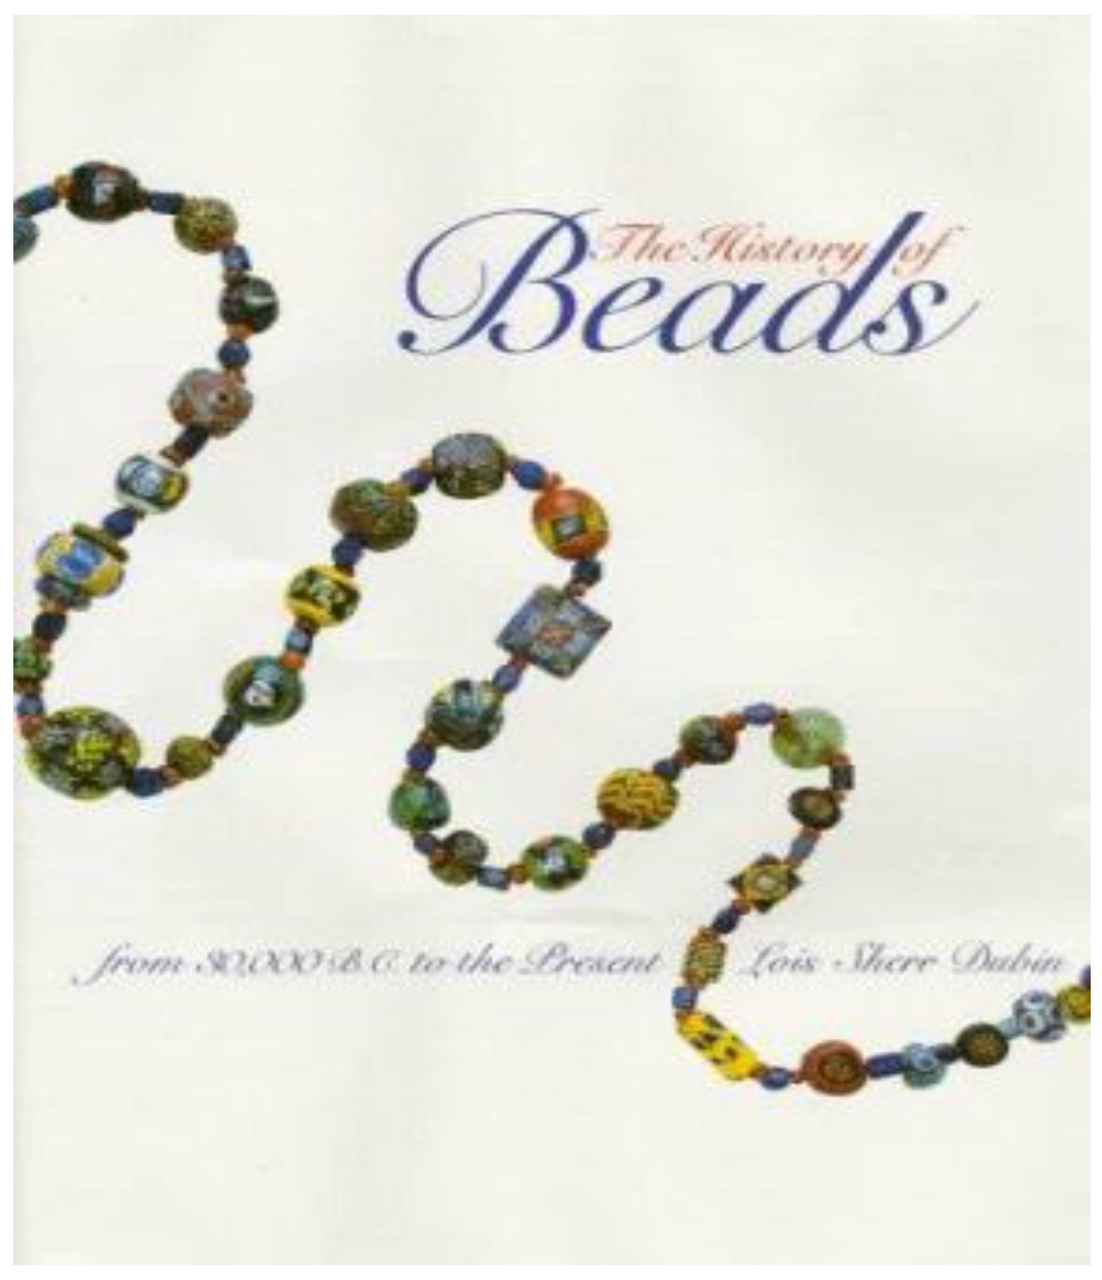 The History of Beads (USED BOOK)